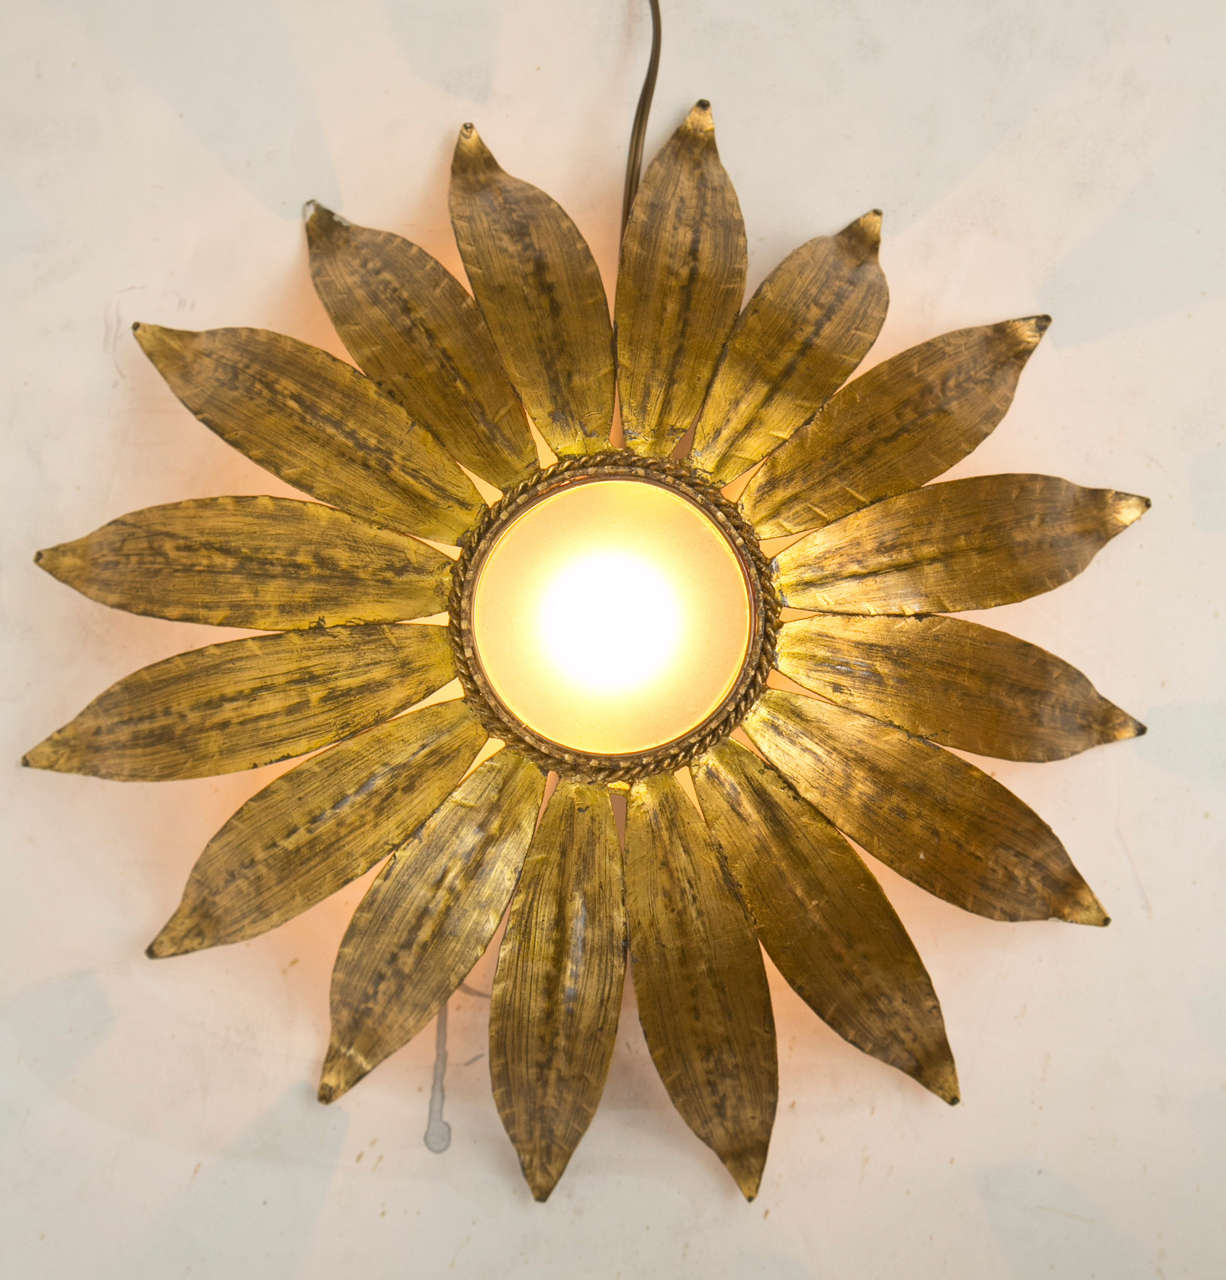 A lovely ceiling semi flush mount or wall light in the form of a sunburst. All hand-cut gilt metal with a frosted glass center shade. Please contact us for possible modifications that suit your needs.